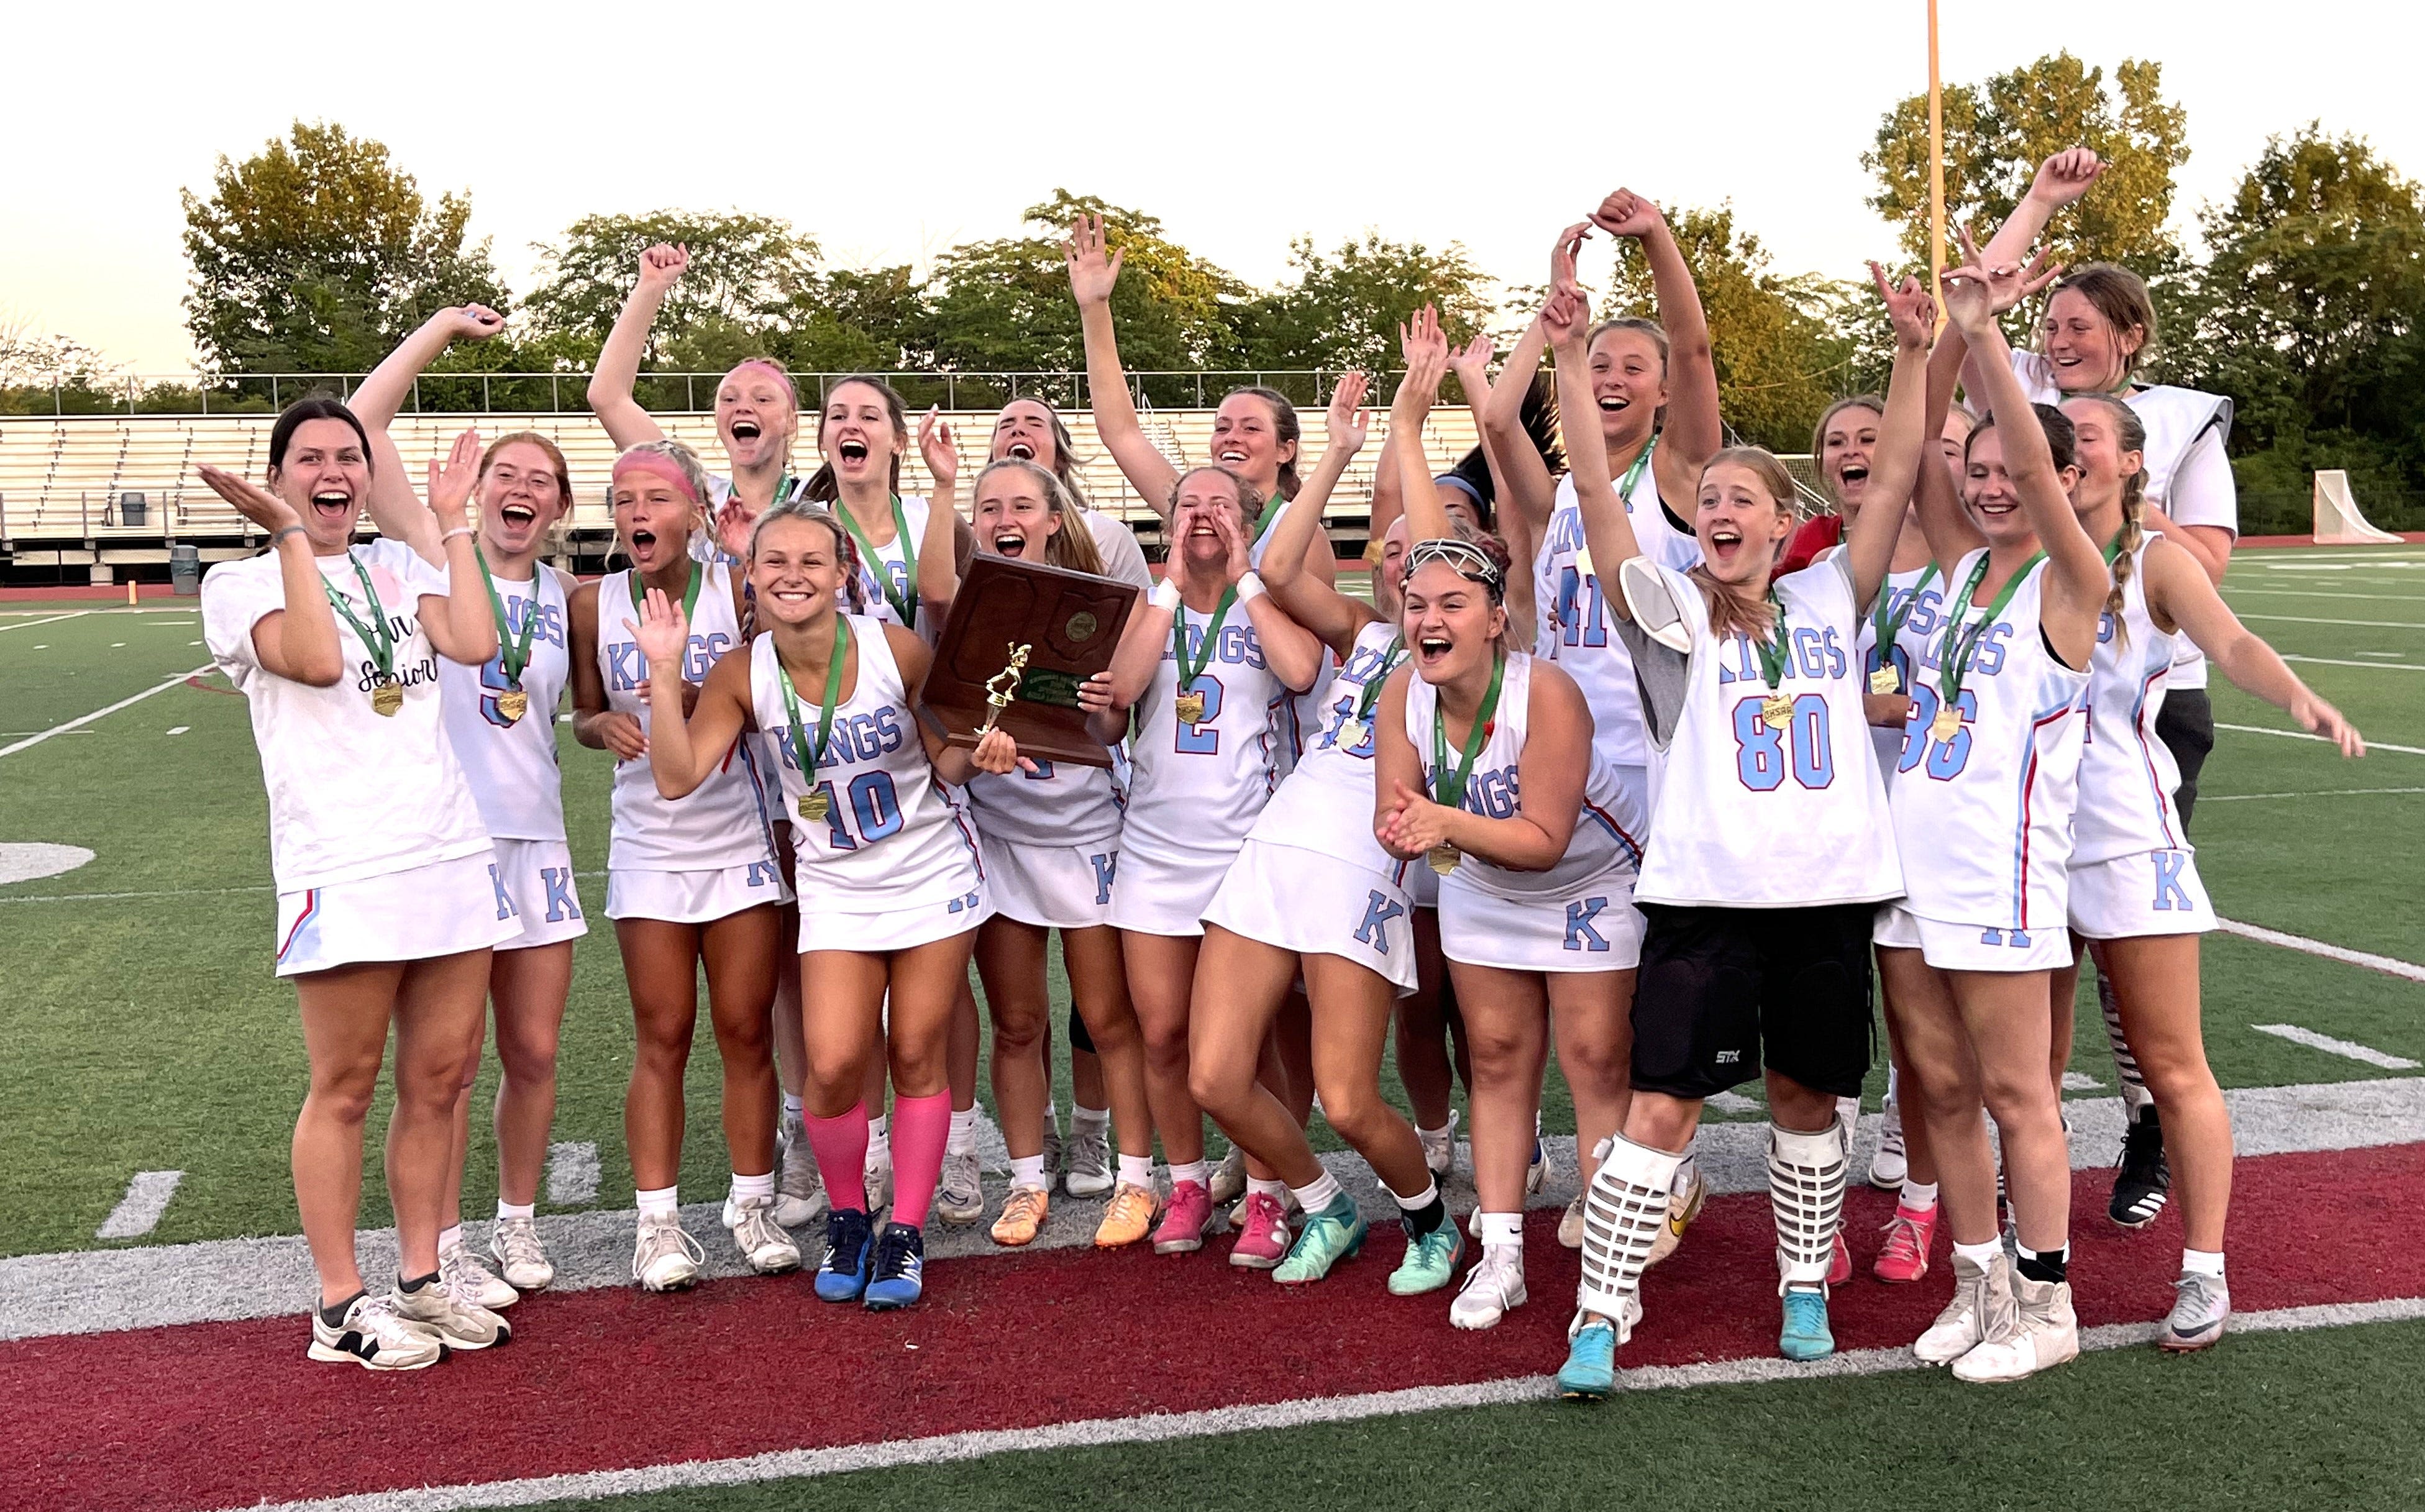 'We put in a lot of work:' Kings girls lacrosse finds redemption in first regional title